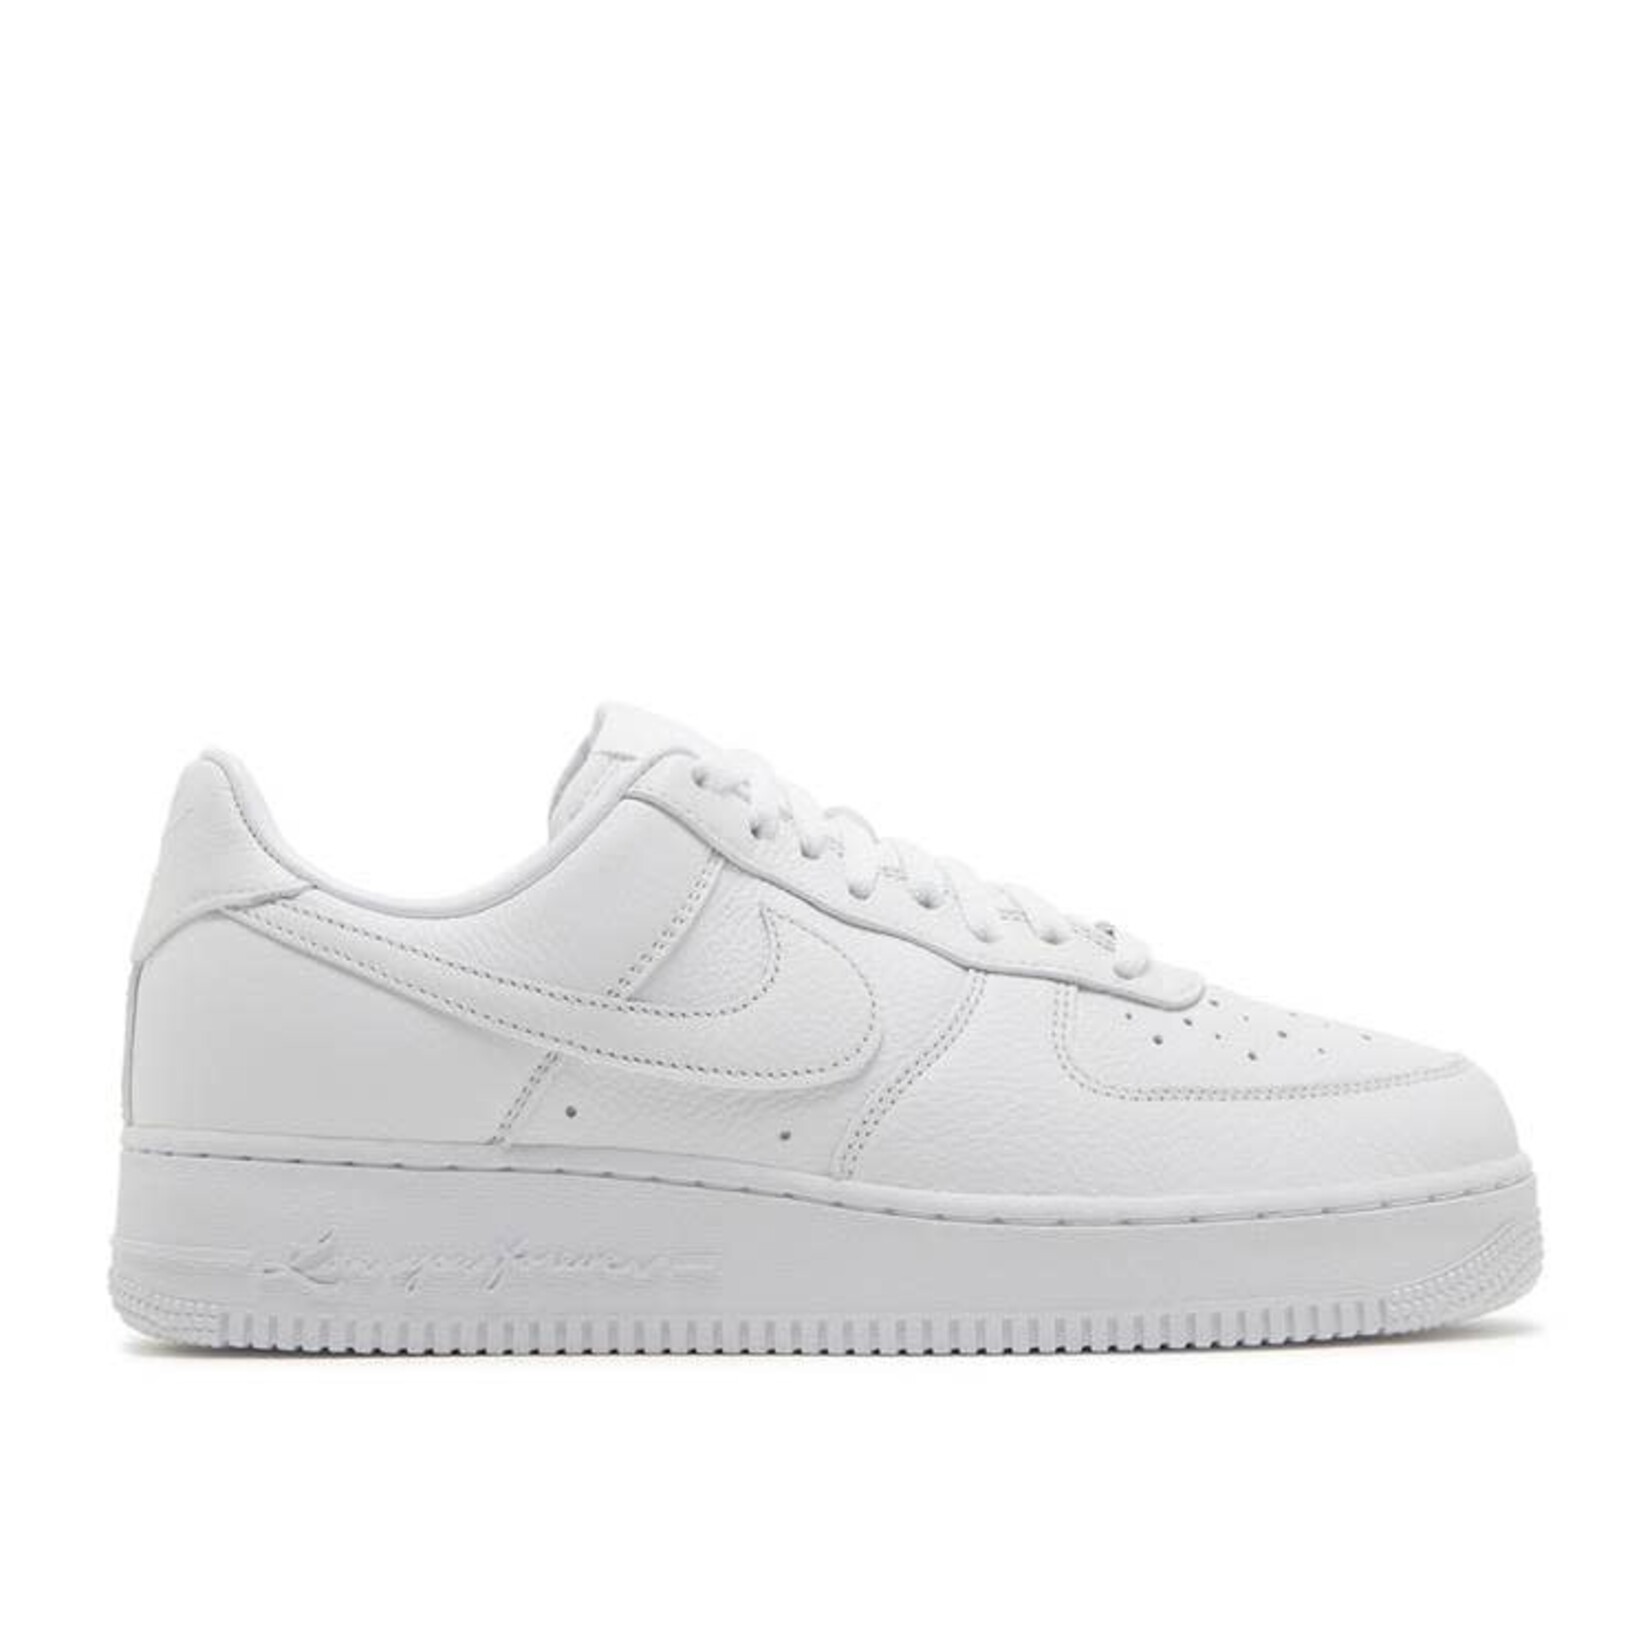 Nike Nike Air Force 1 Low Drake NOCTA Certified Lover Boy Size 12, DS BRAND NEW